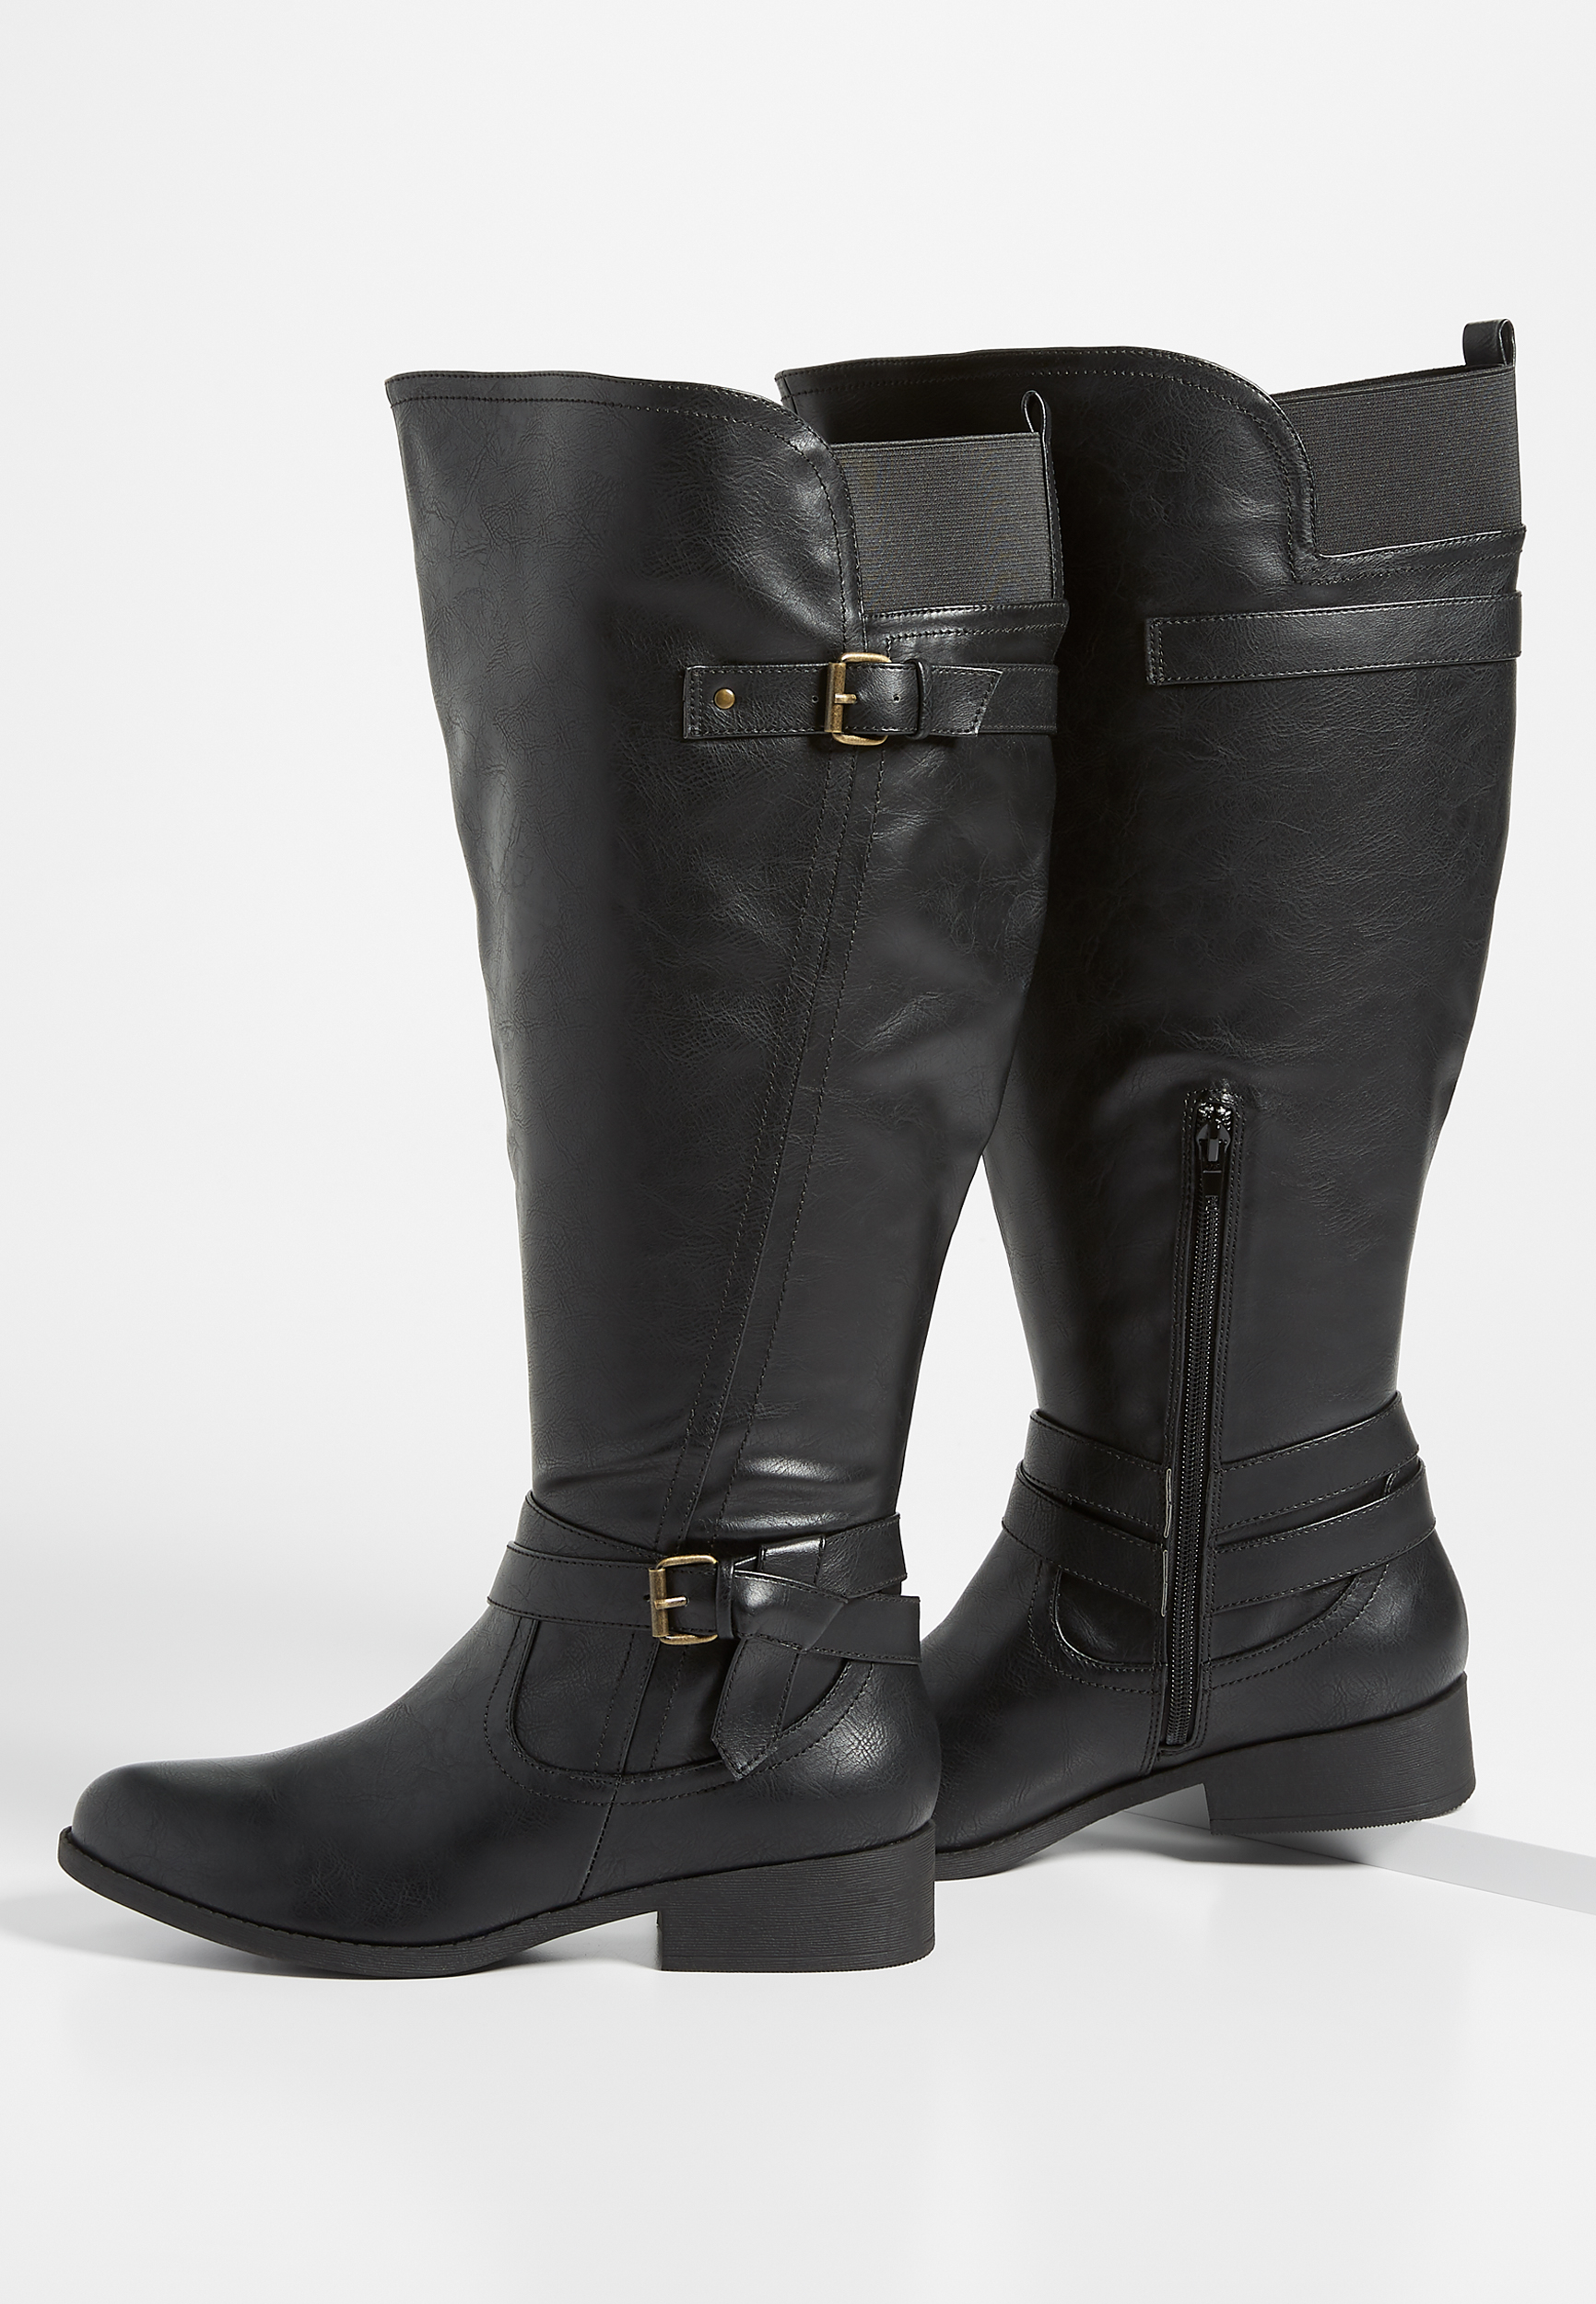 stretchy wide calf boots